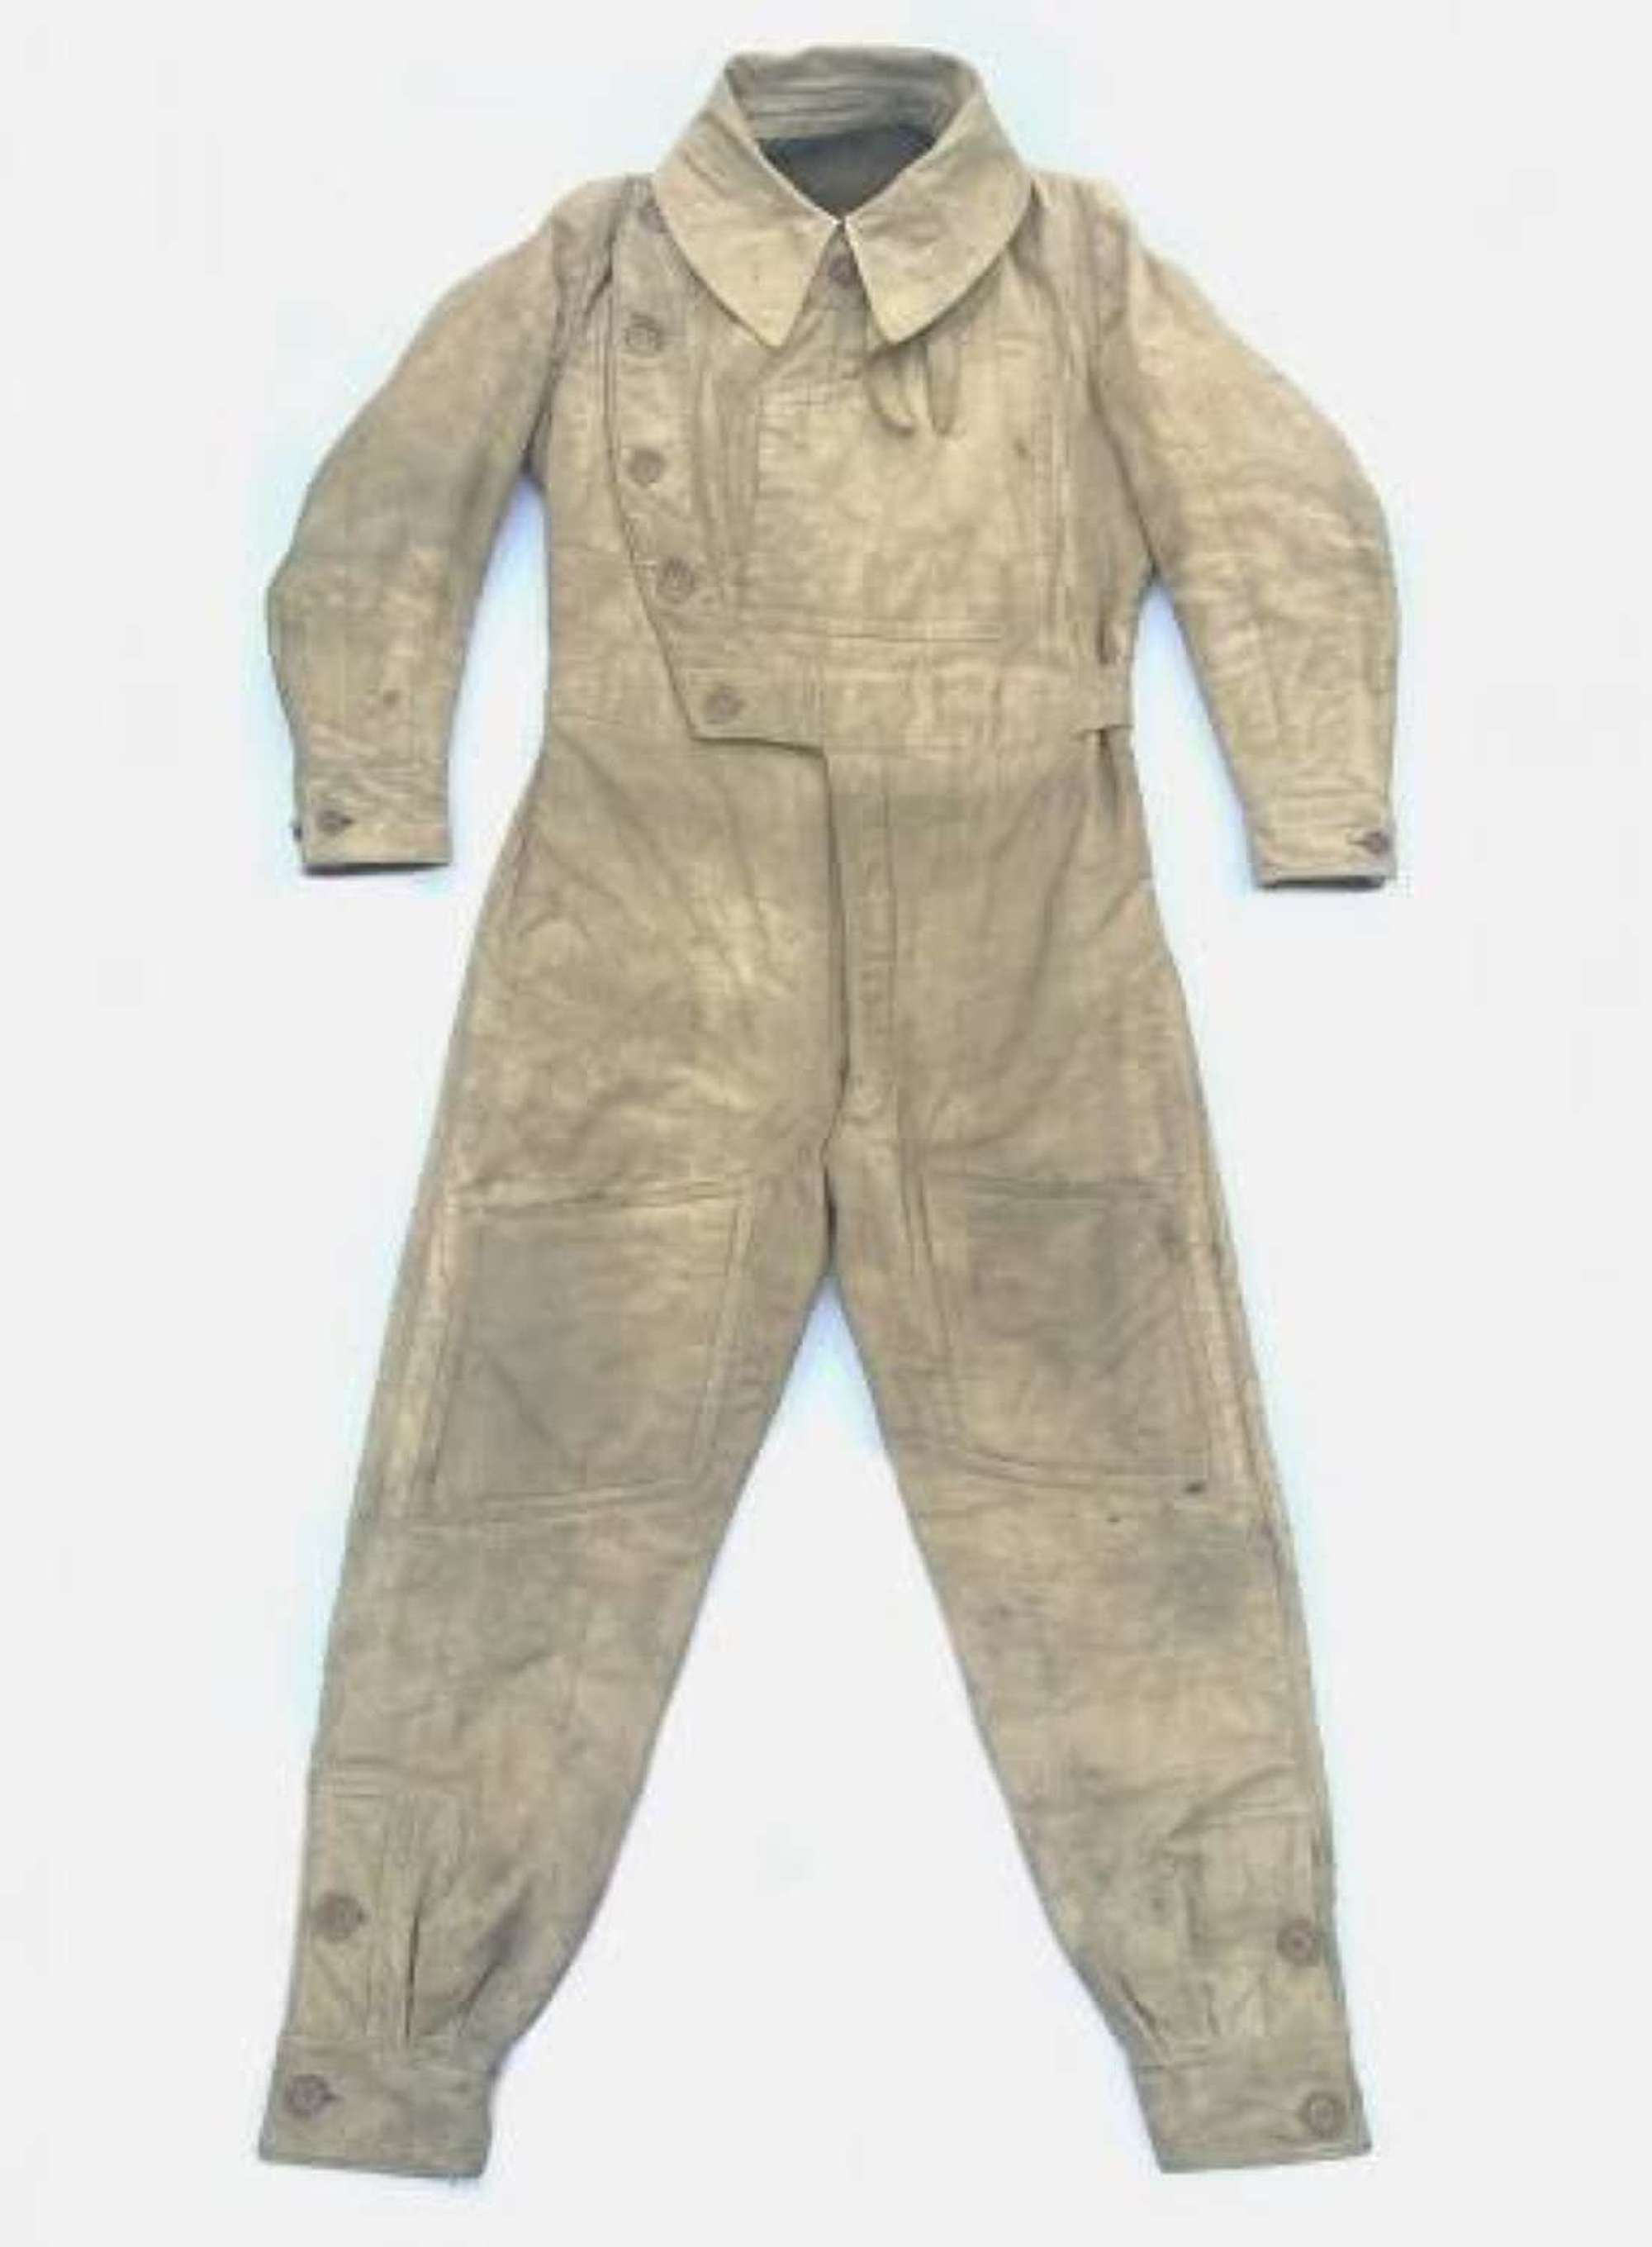 Scarce Original Great War Royal Flying Corps Sidcot Suit